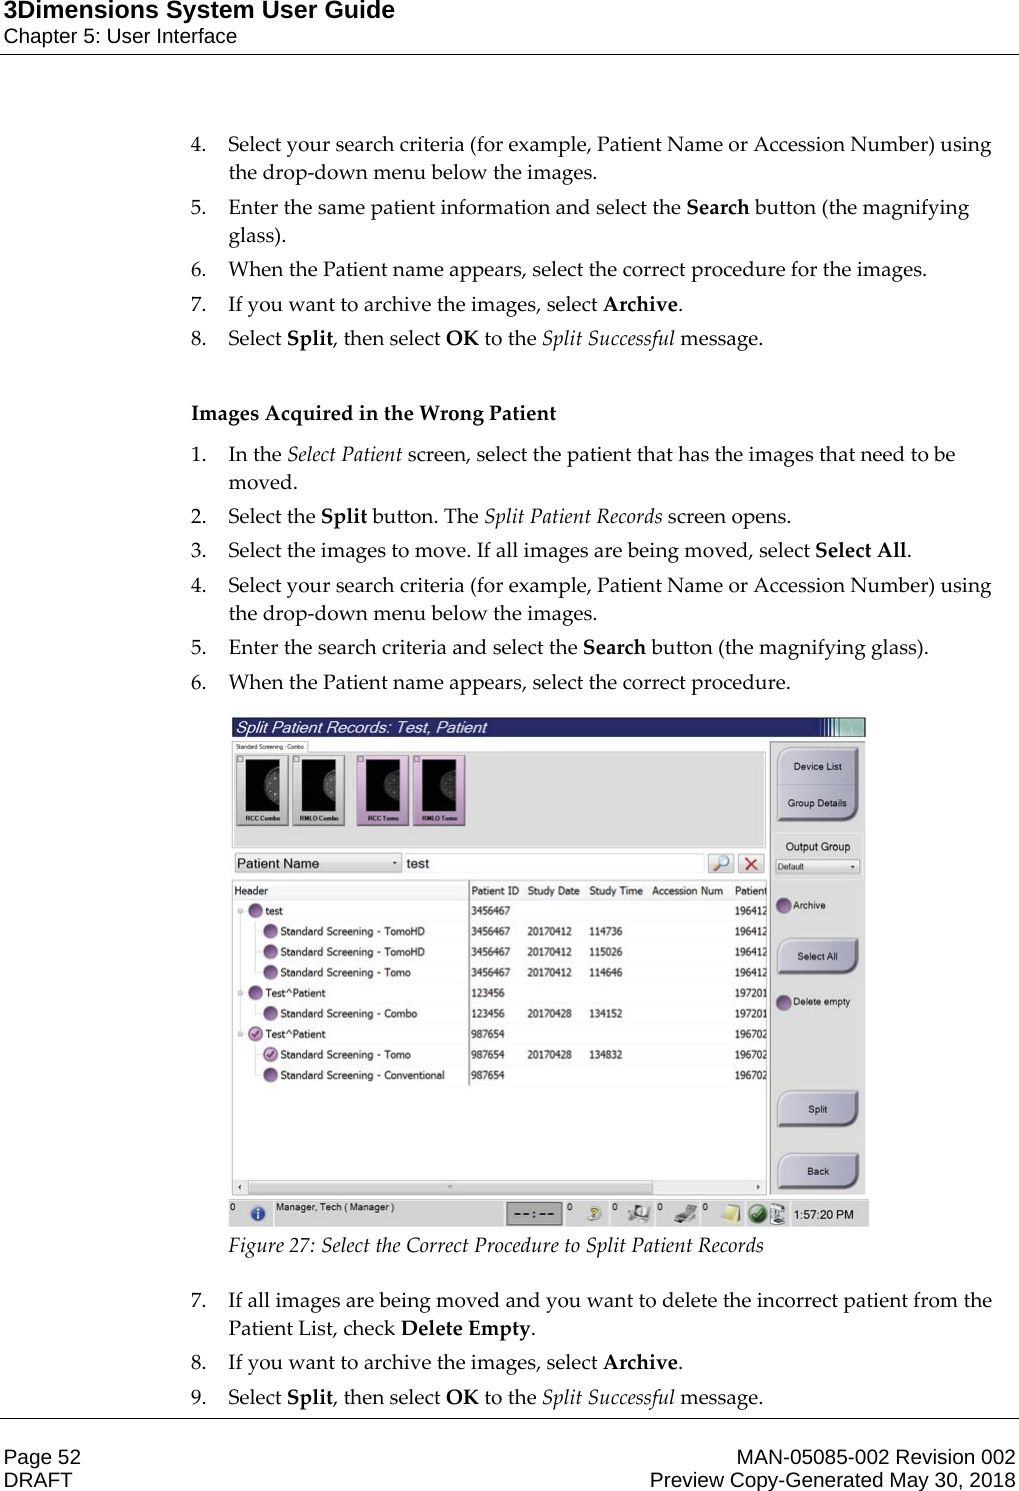 3Dimensions System User GuideChapter 5: User InterfacePage 52 MAN-05085-002 Revision 002  DRAFT Preview Copy-Generated May 30, 20184. Select your search criteria (for example, Patient Name or Accession Number) using the drop-down menu below the images. 5. Enter the same patient information and select the Search button (the magnifying glass). 6. When the Patient name appears, select the correct procedure for the images. 7. If you want to archive the images, select Archive. 8. Select Split, then select OK to the Split Successful message.  Images Acquired in the Wrong Patient 1. In the Select Patient screen, select the patient that has the images that need to be moved. 2. Select the Split button. The Split Patient Records screen opens. 3. Select the images to move. If all images are being moved, select Select All. 4. Select your search criteria (for example, Patient Name or Accession Number) using the drop-down menu below the images. 5. Enter the search criteria and select the Search button (the magnifying glass). 6. When the Patient name appears, select the correct procedure.  Figure 27: Select the Correct Procedure to Split Patient Records    7. If all images are being moved and you want to delete the incorrect patient from the Patient List, check Delete Empty. 8. If you want to archive the images, select Archive. 9. Select Split, then select OK to the Split Successful message. 